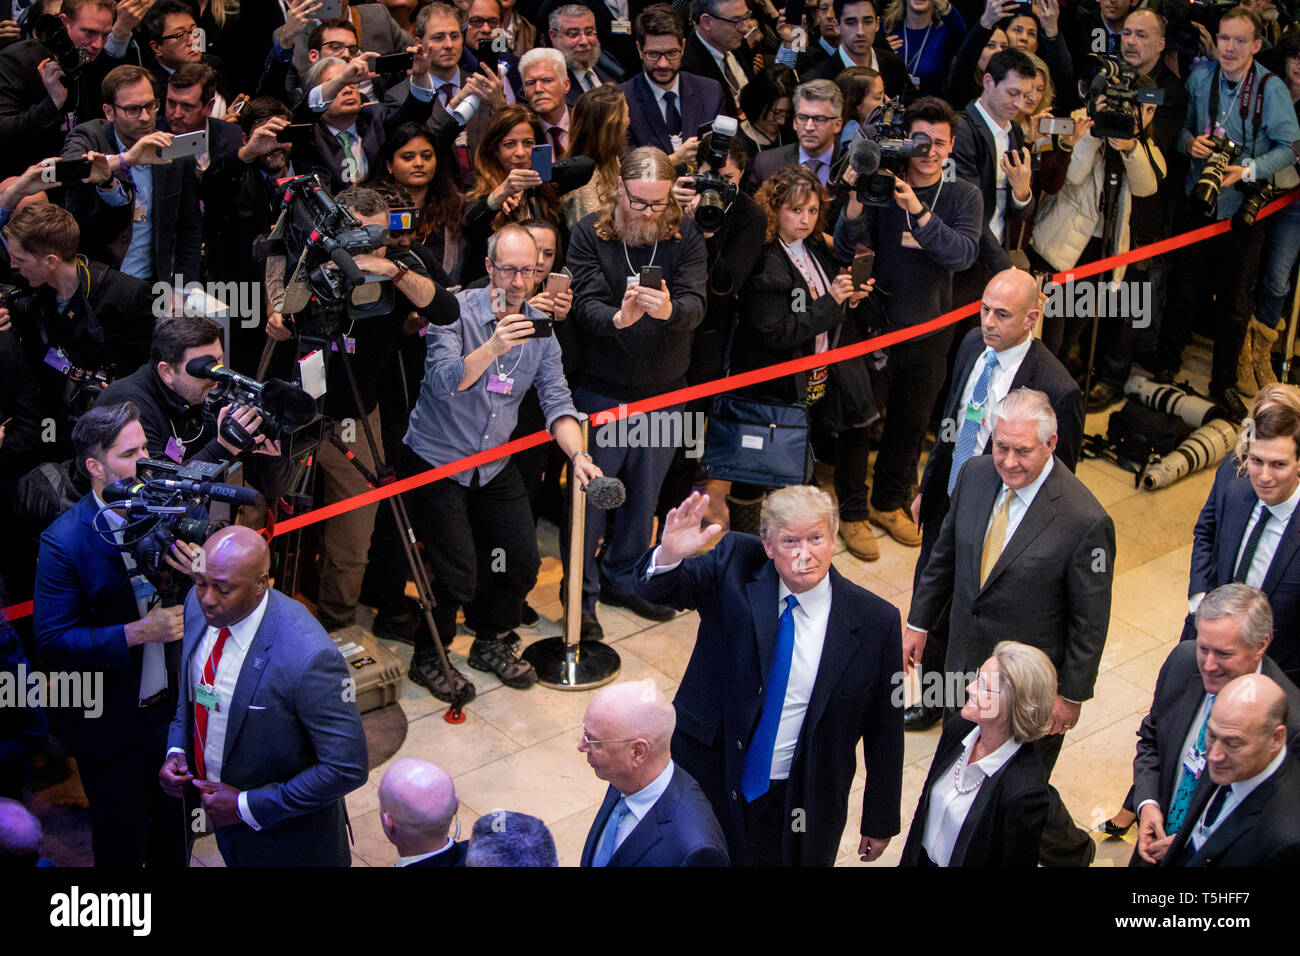 Massive crowd inside the Congress Center in Davos as the US President Donald J. Trump arrives to the World Economic Forum. Behind him in the entourage can be seen Rex Tillerson, Mark Meadows, Jared Kushner and Gary Cohn Stock Photo